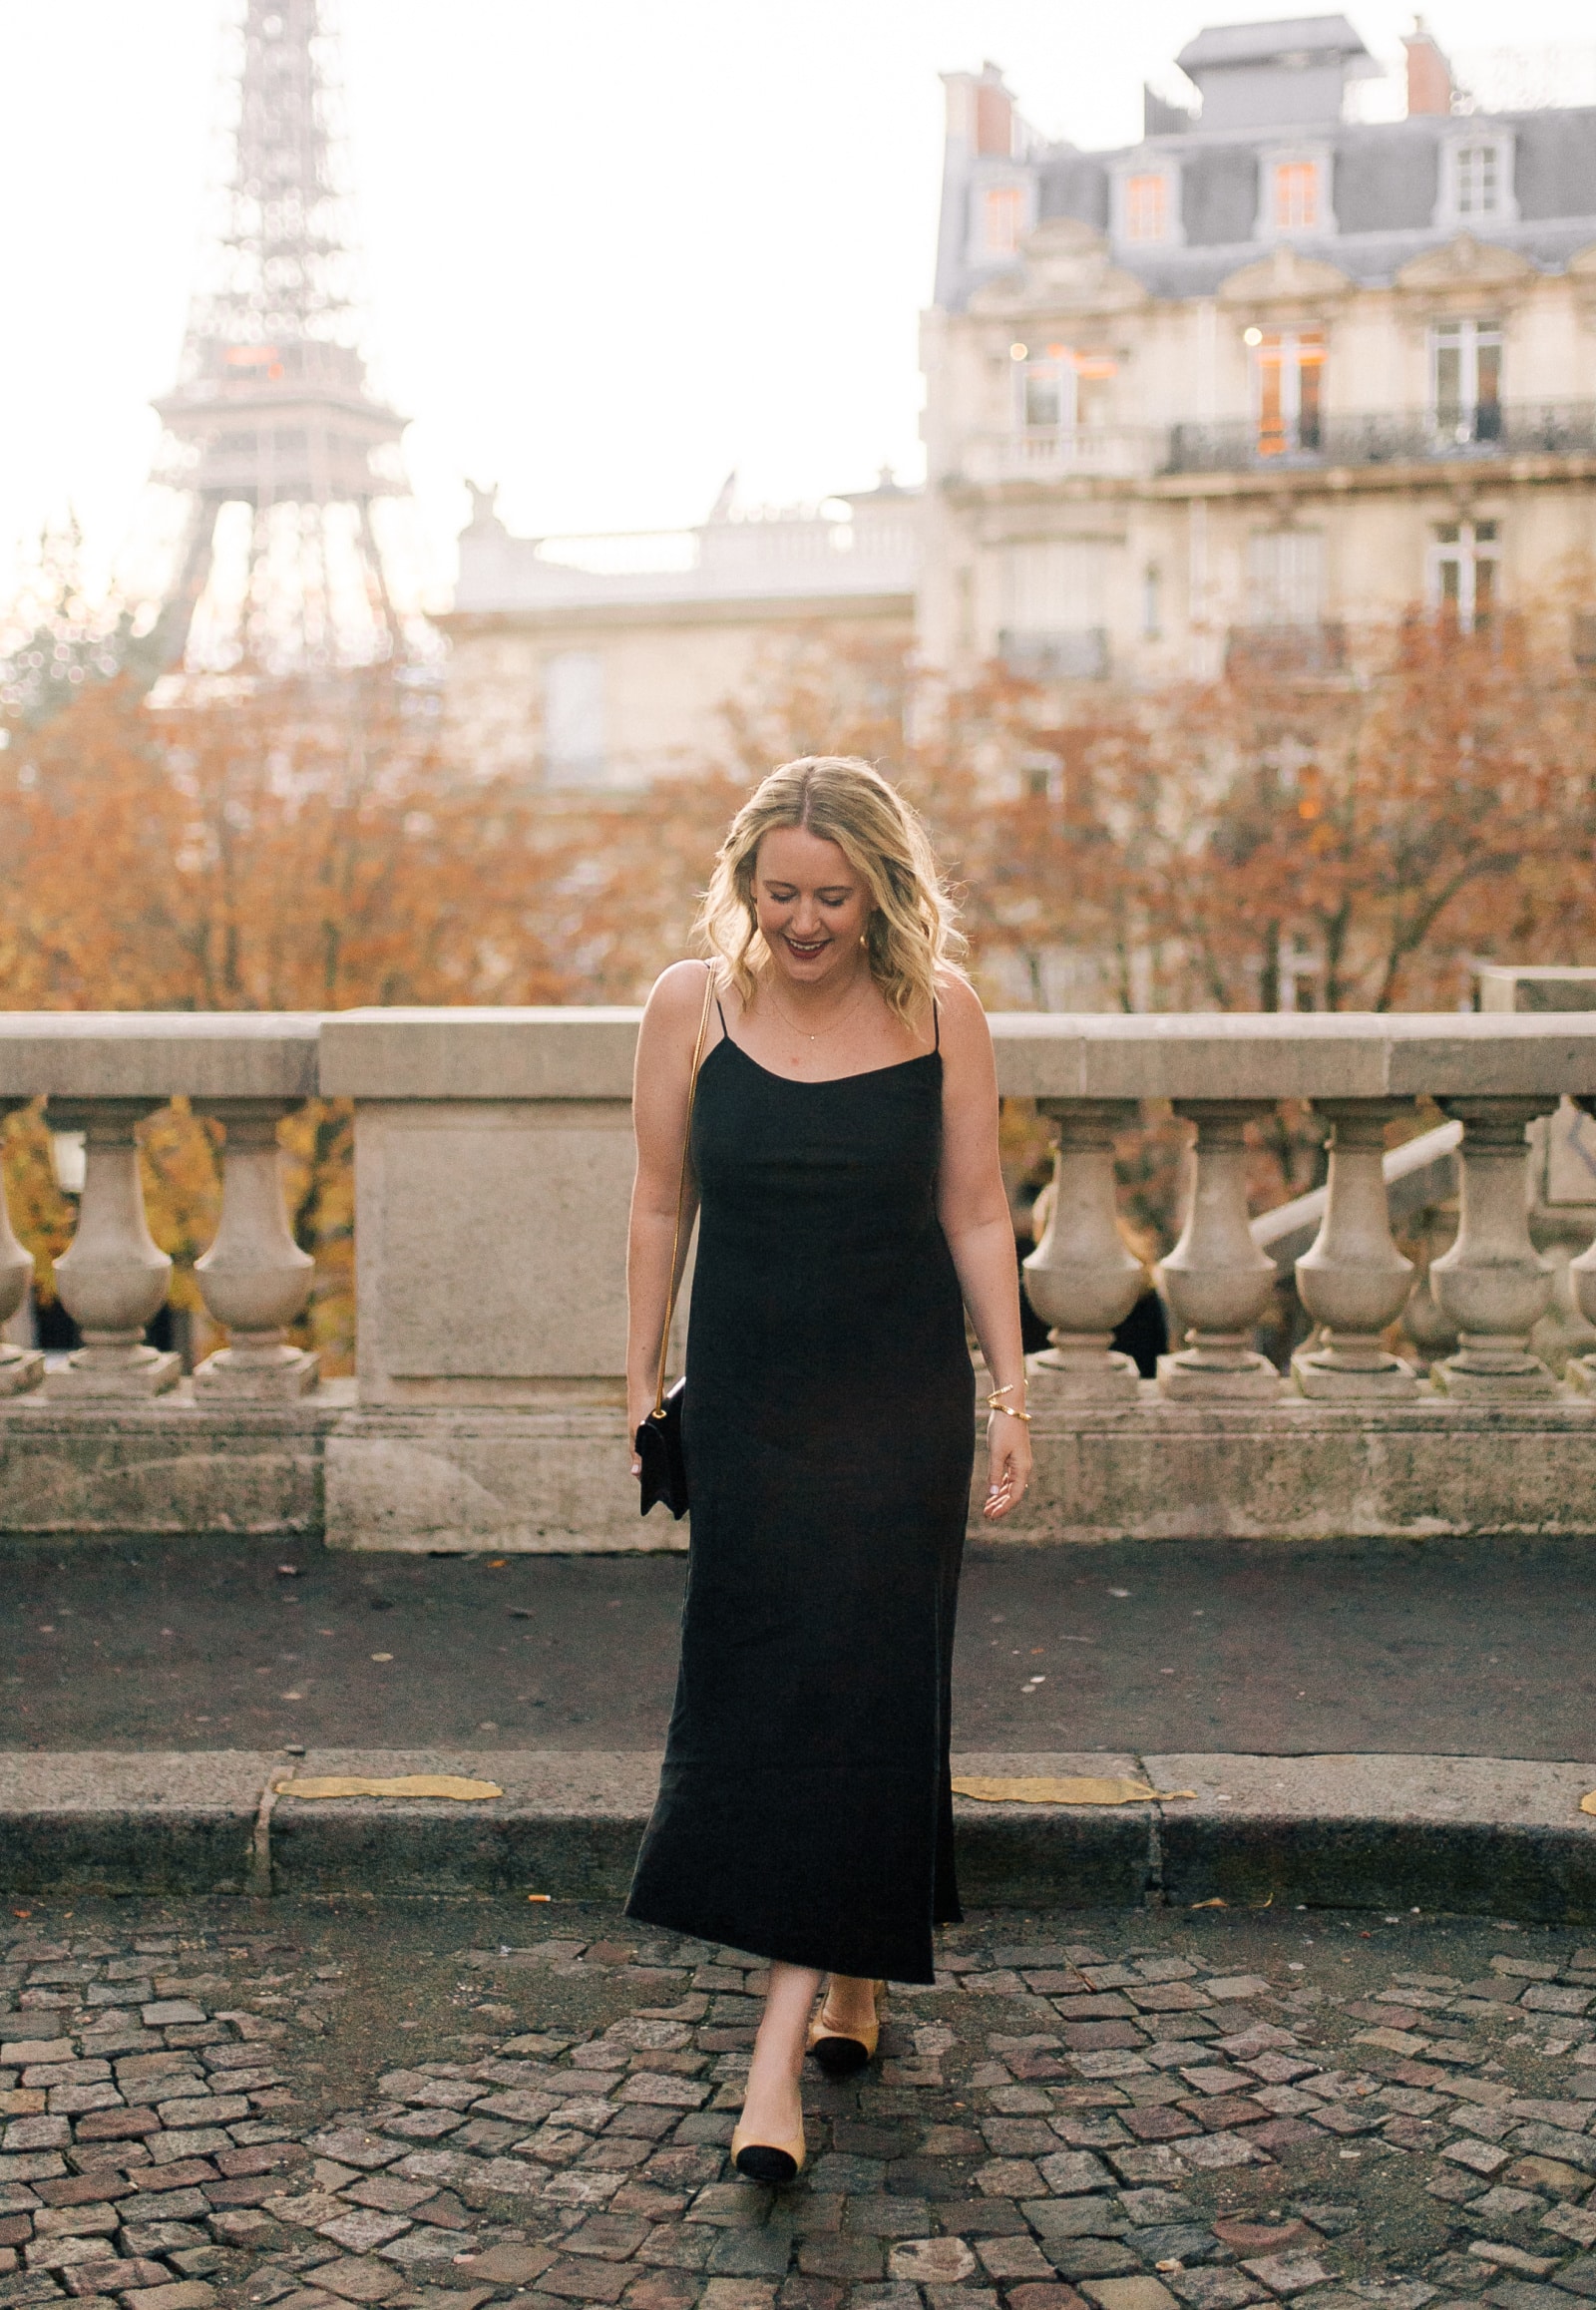 J.Crew Slip Dress in Paris | Things in My Closet I Can't Wait to Wear This Fall